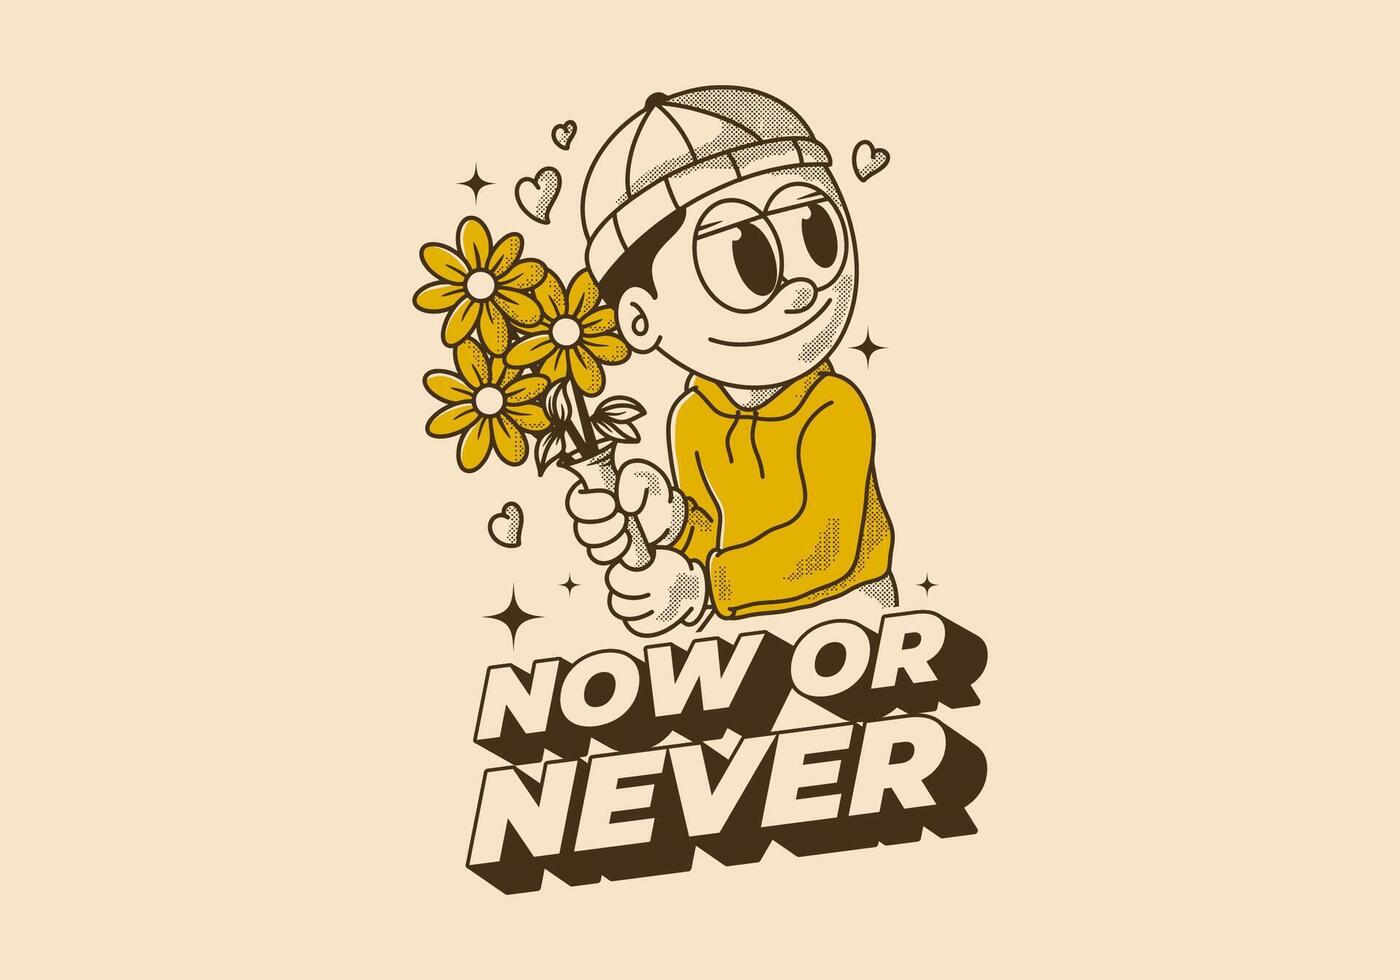 Now or never. Retro illustration of a beanie guy holding a flower vector